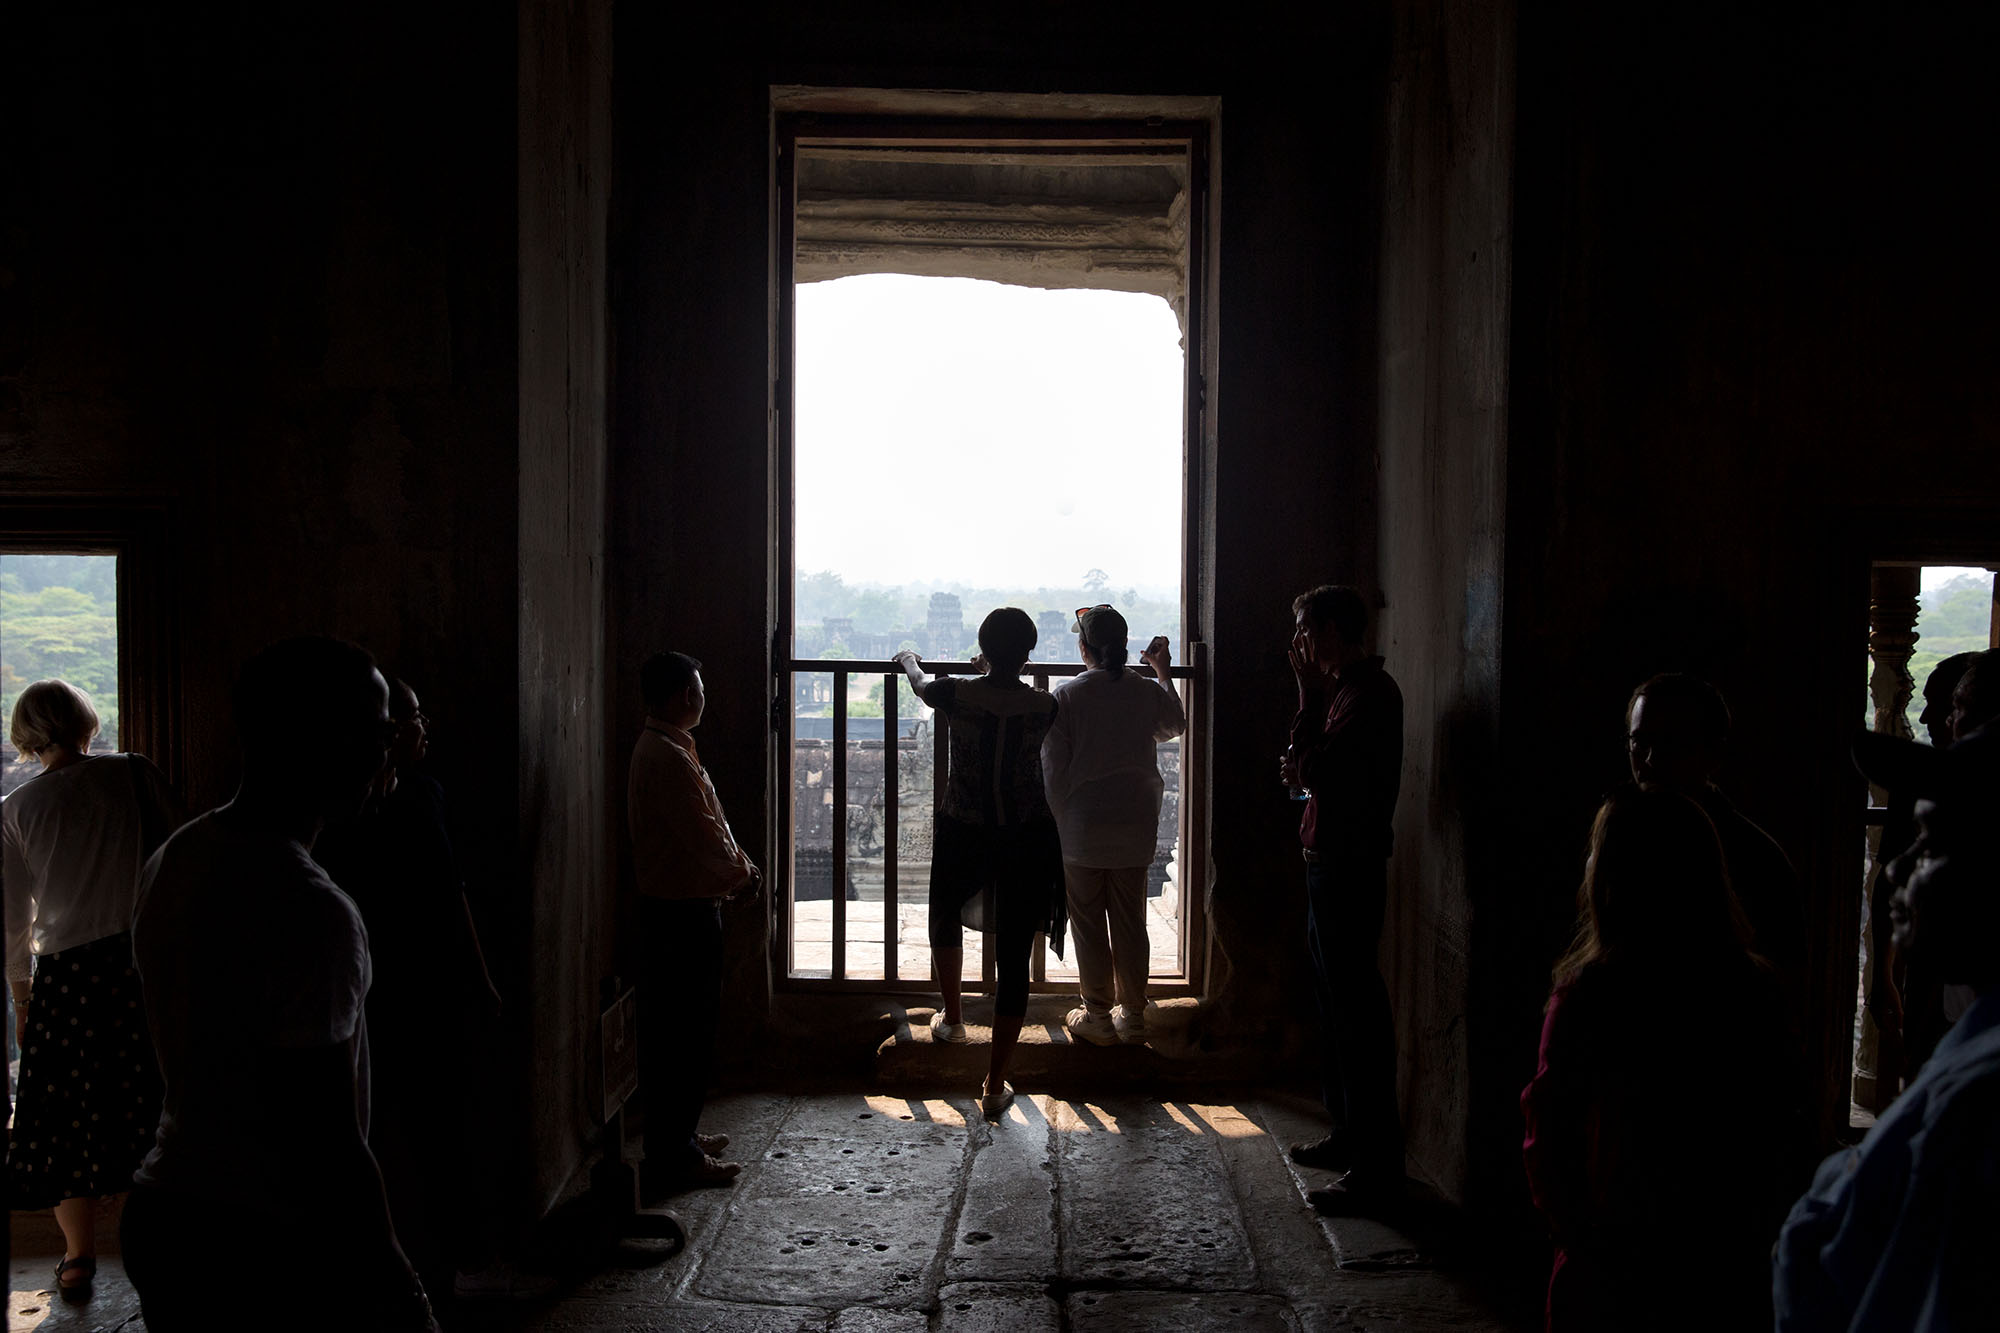 The First Lady takes in a view of Angkor Wat. (Official White House Photo by Amanda Lucidon)